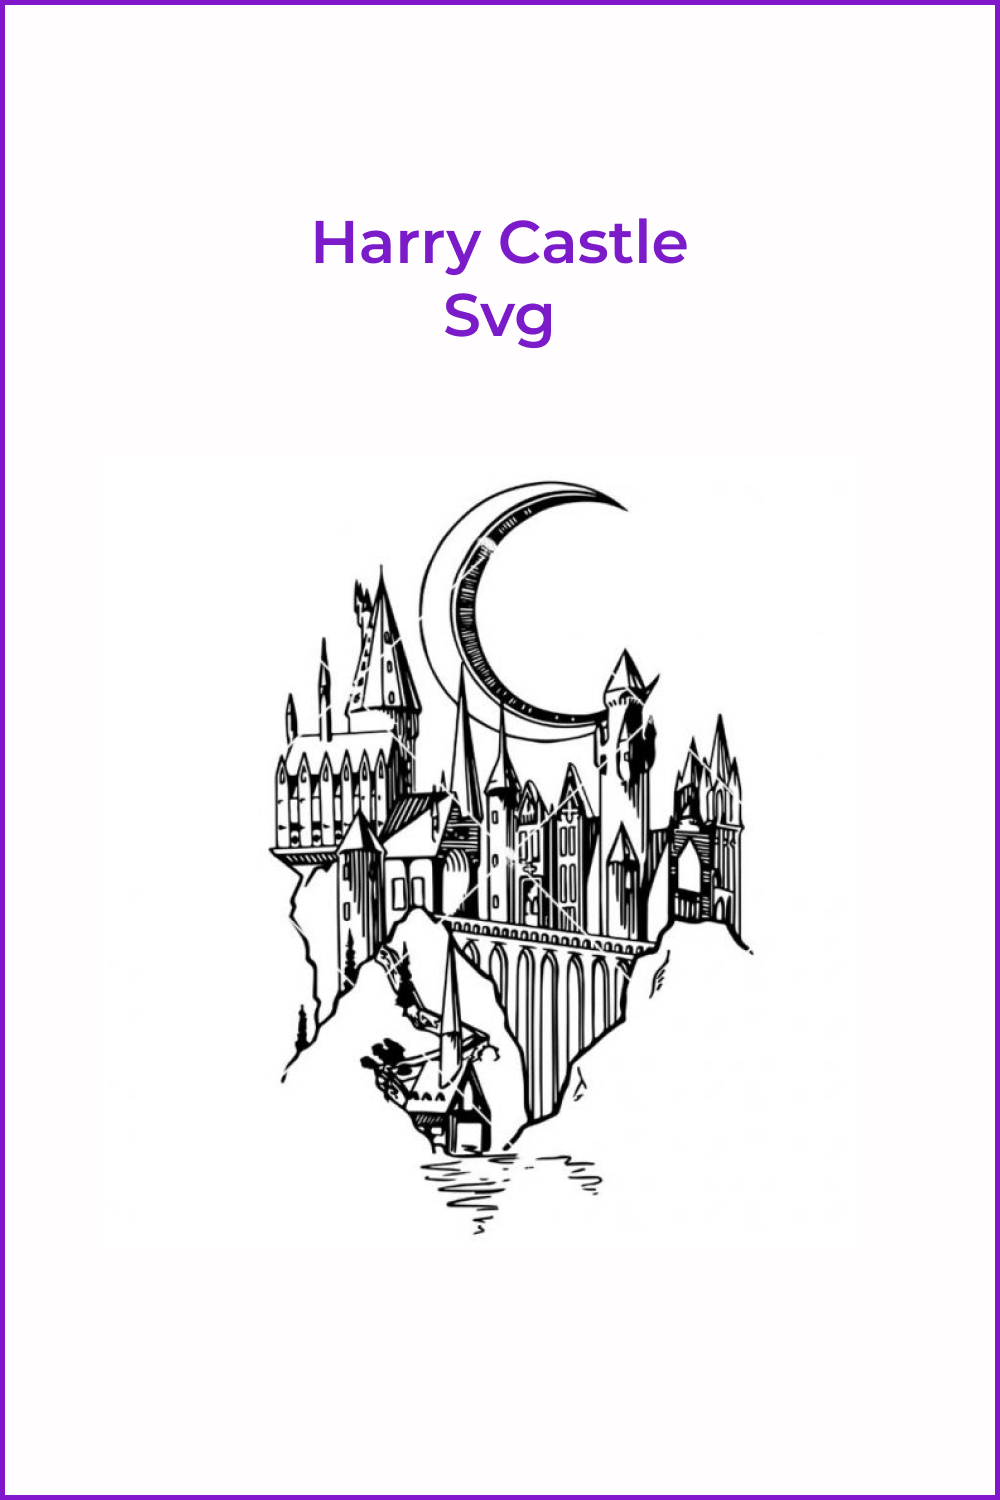 Silhouette image of Hogwarts castle and moon.